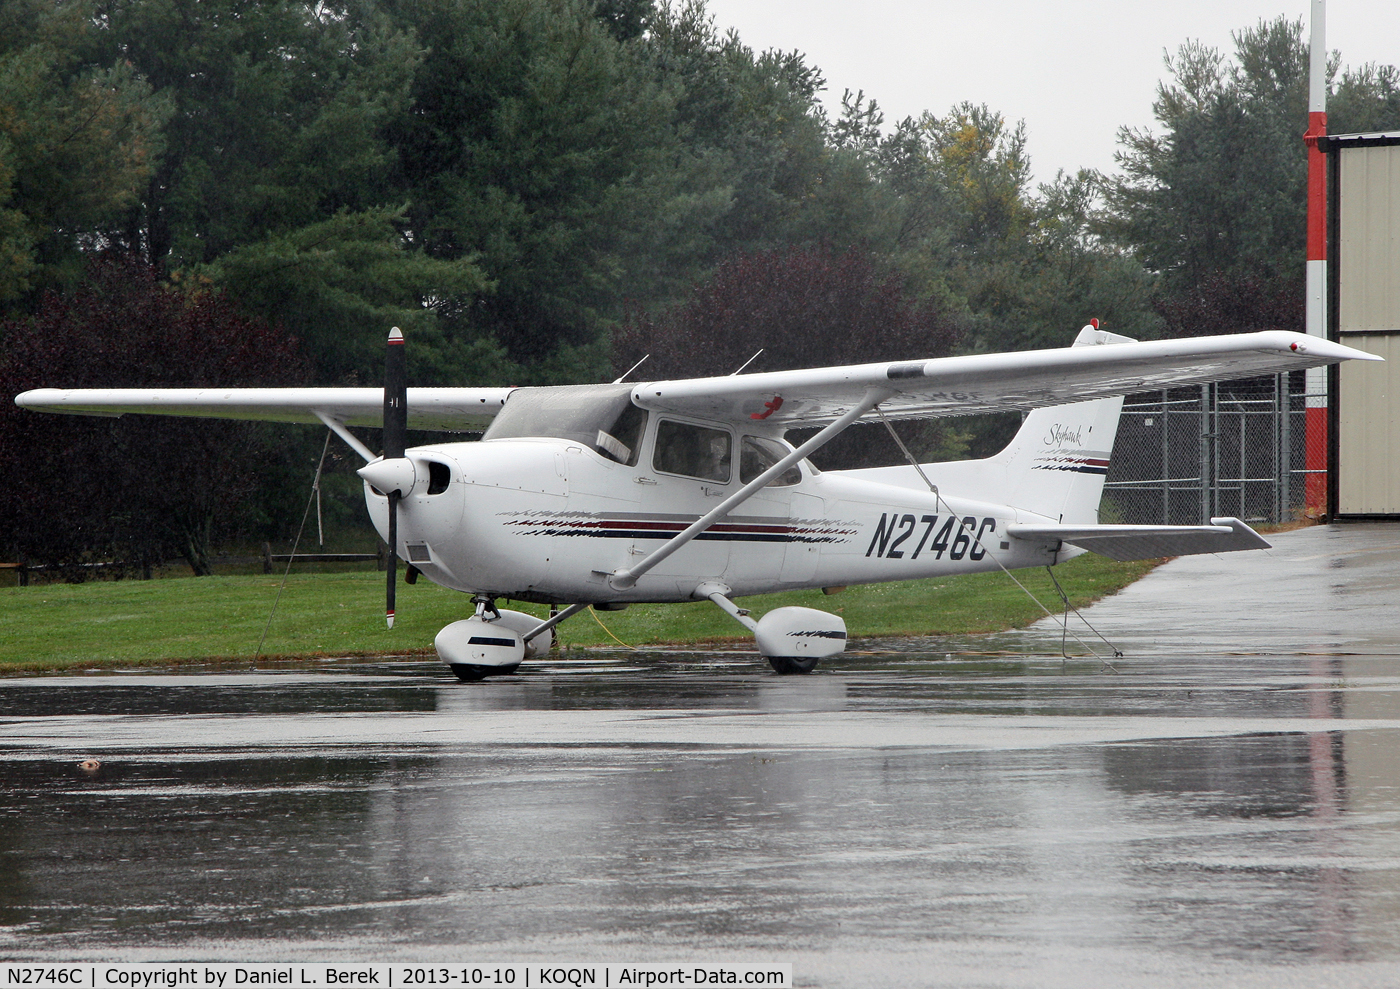 N2746C, 1998 Cessna 172R C/N 17280587, A shiny new Skyhawk braves a downpour at Brandywine Airport.